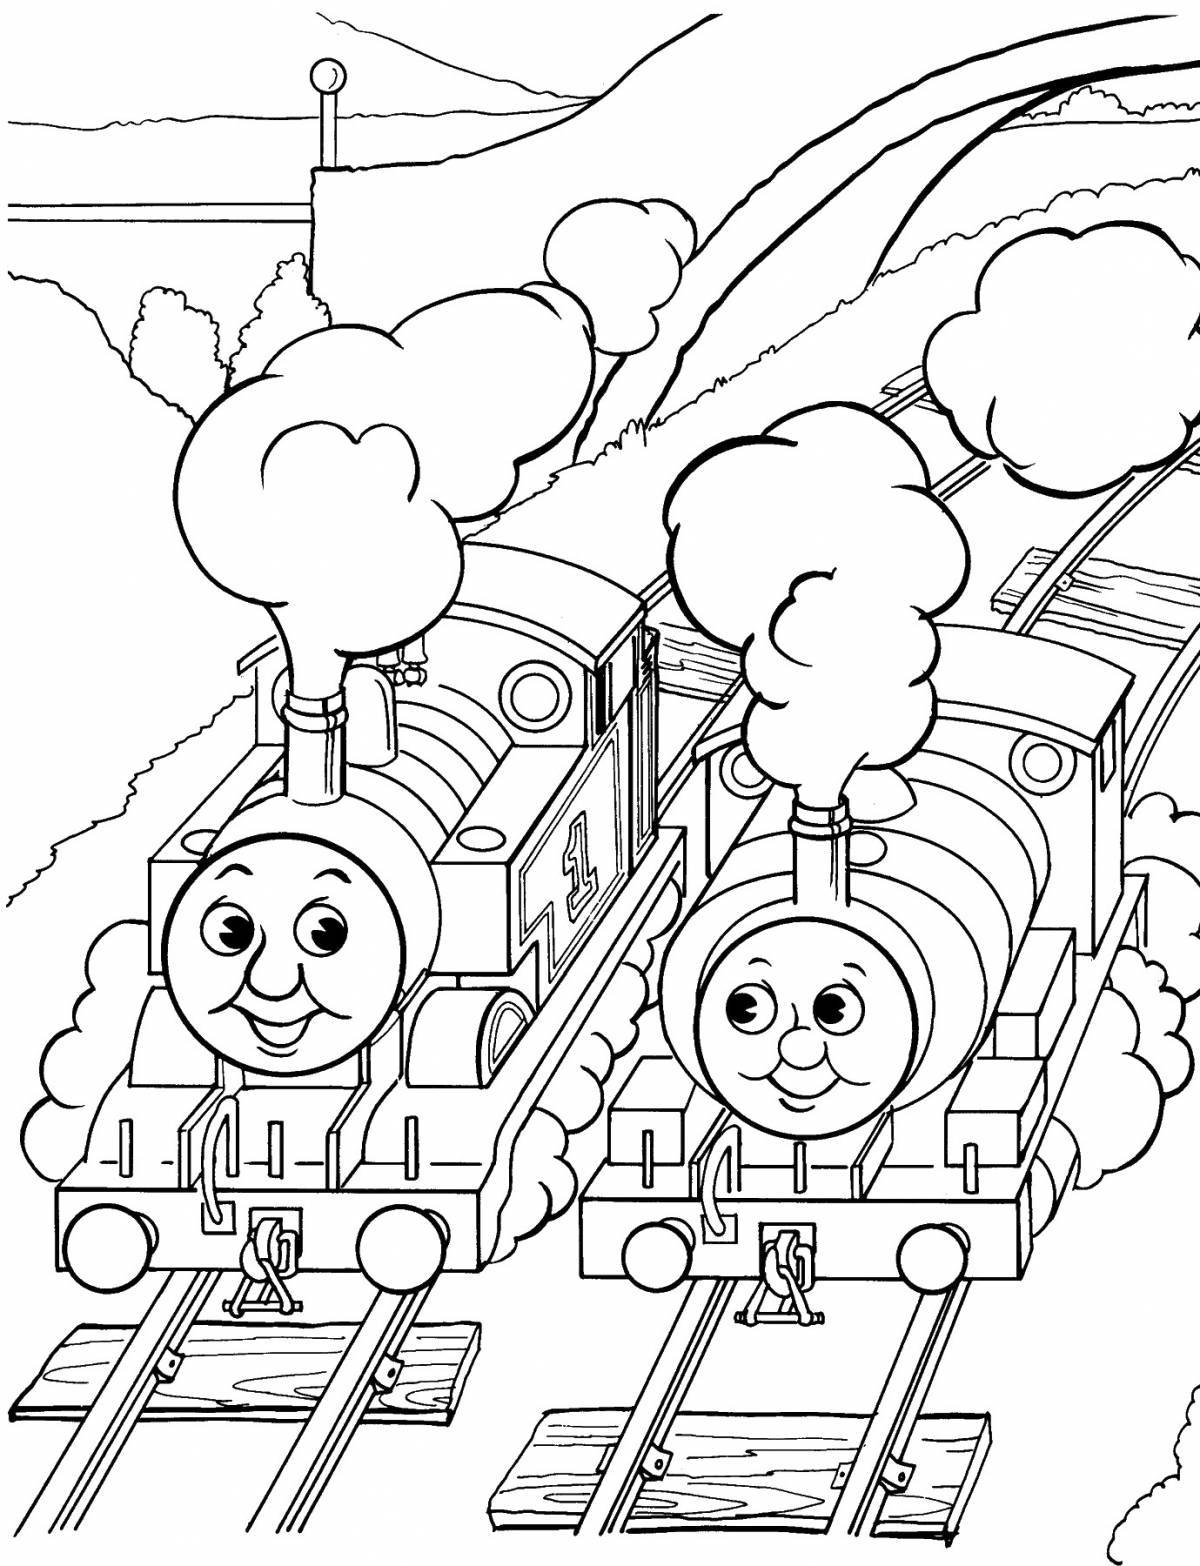 Thomas the Tank Engine Coloring Page